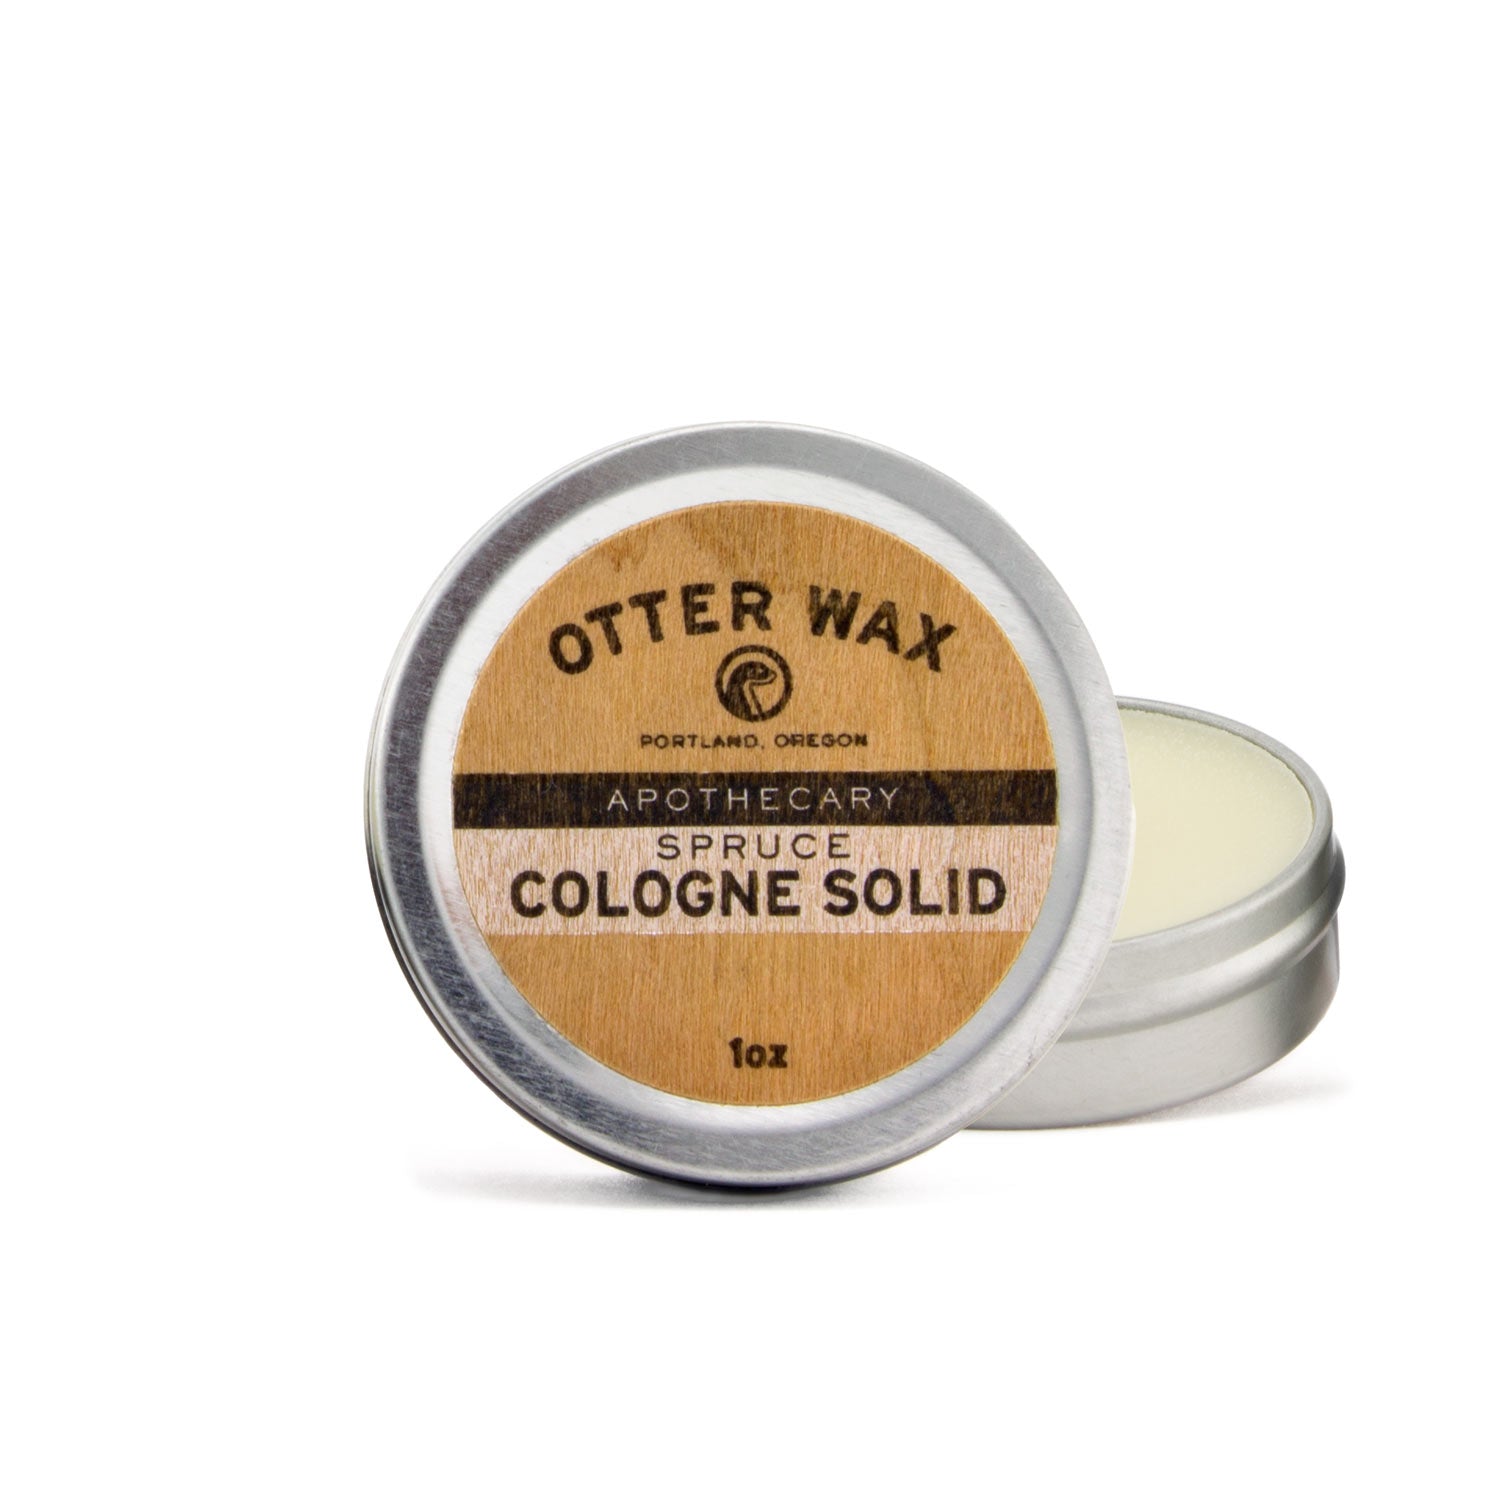 Otter Wax All Natural Spruce Cologne Solid Tin Fragrance For Men Featuring Douglas Fir Vetiver Blend